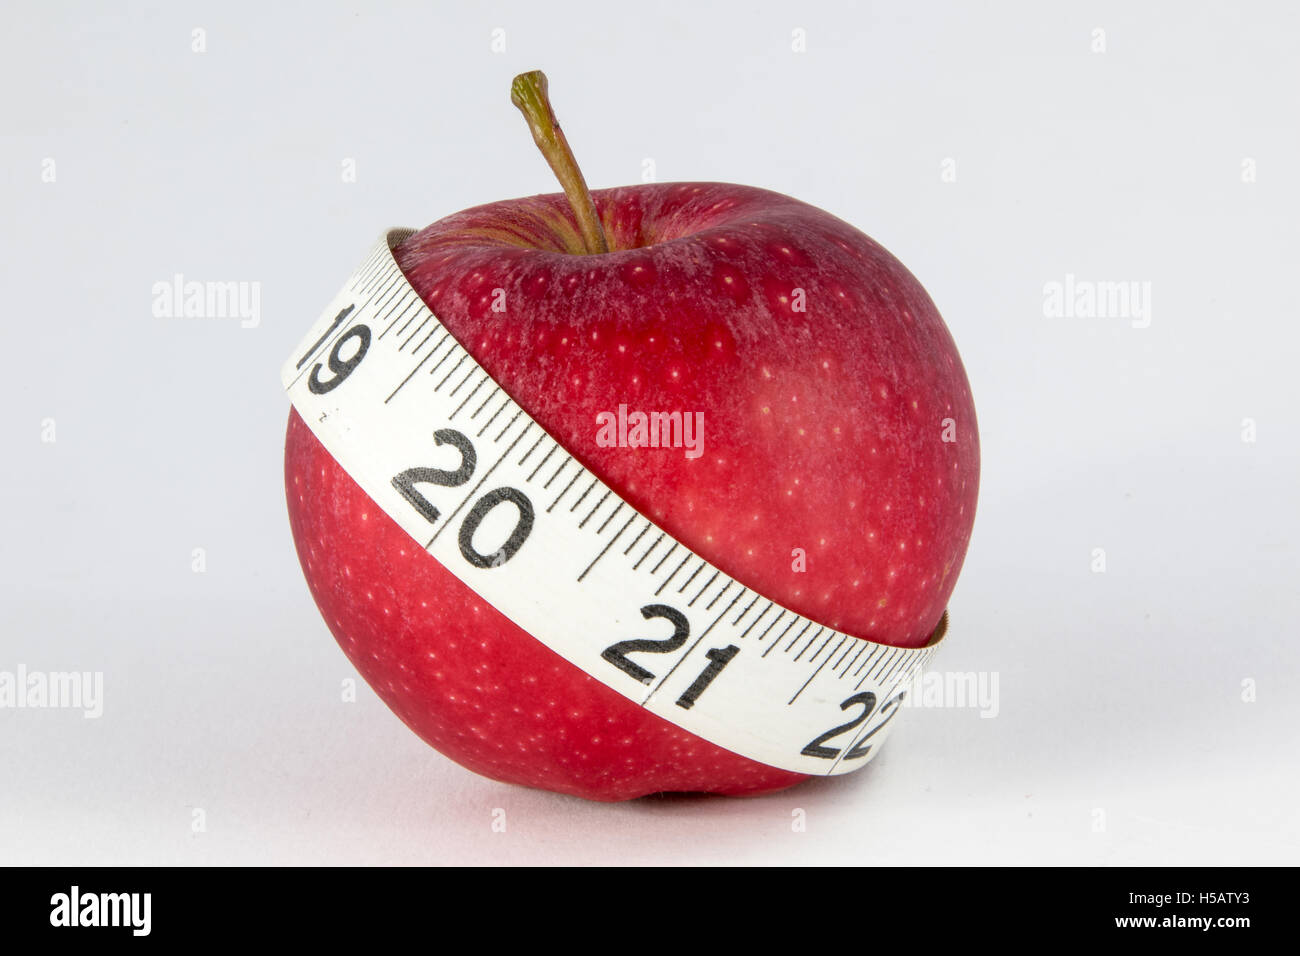 Royal Gala apple with a tape measure. Diet concept. Stock Photo